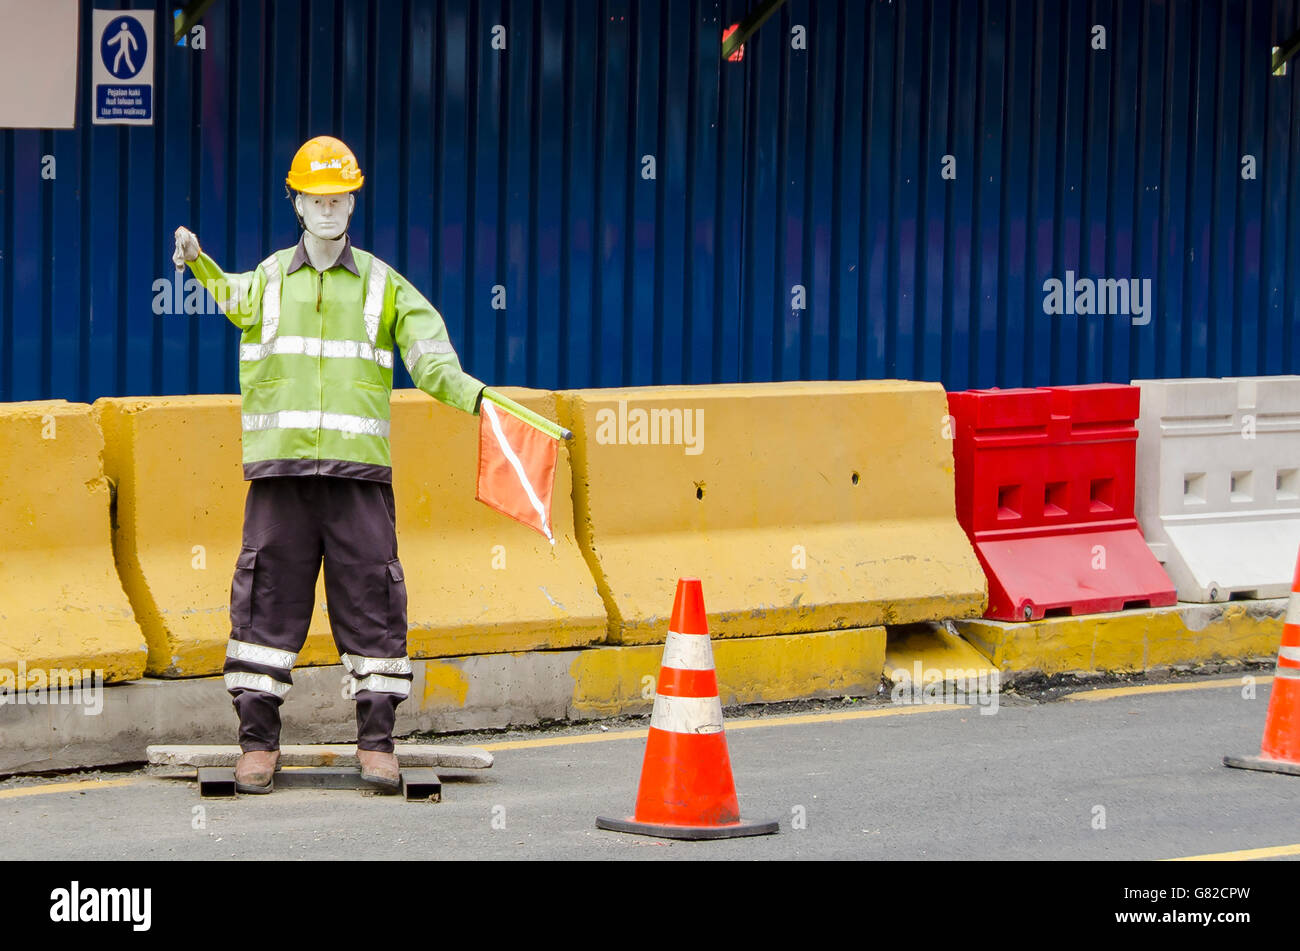 Mannequin in reflective clothing against barricades on road Stock Photo